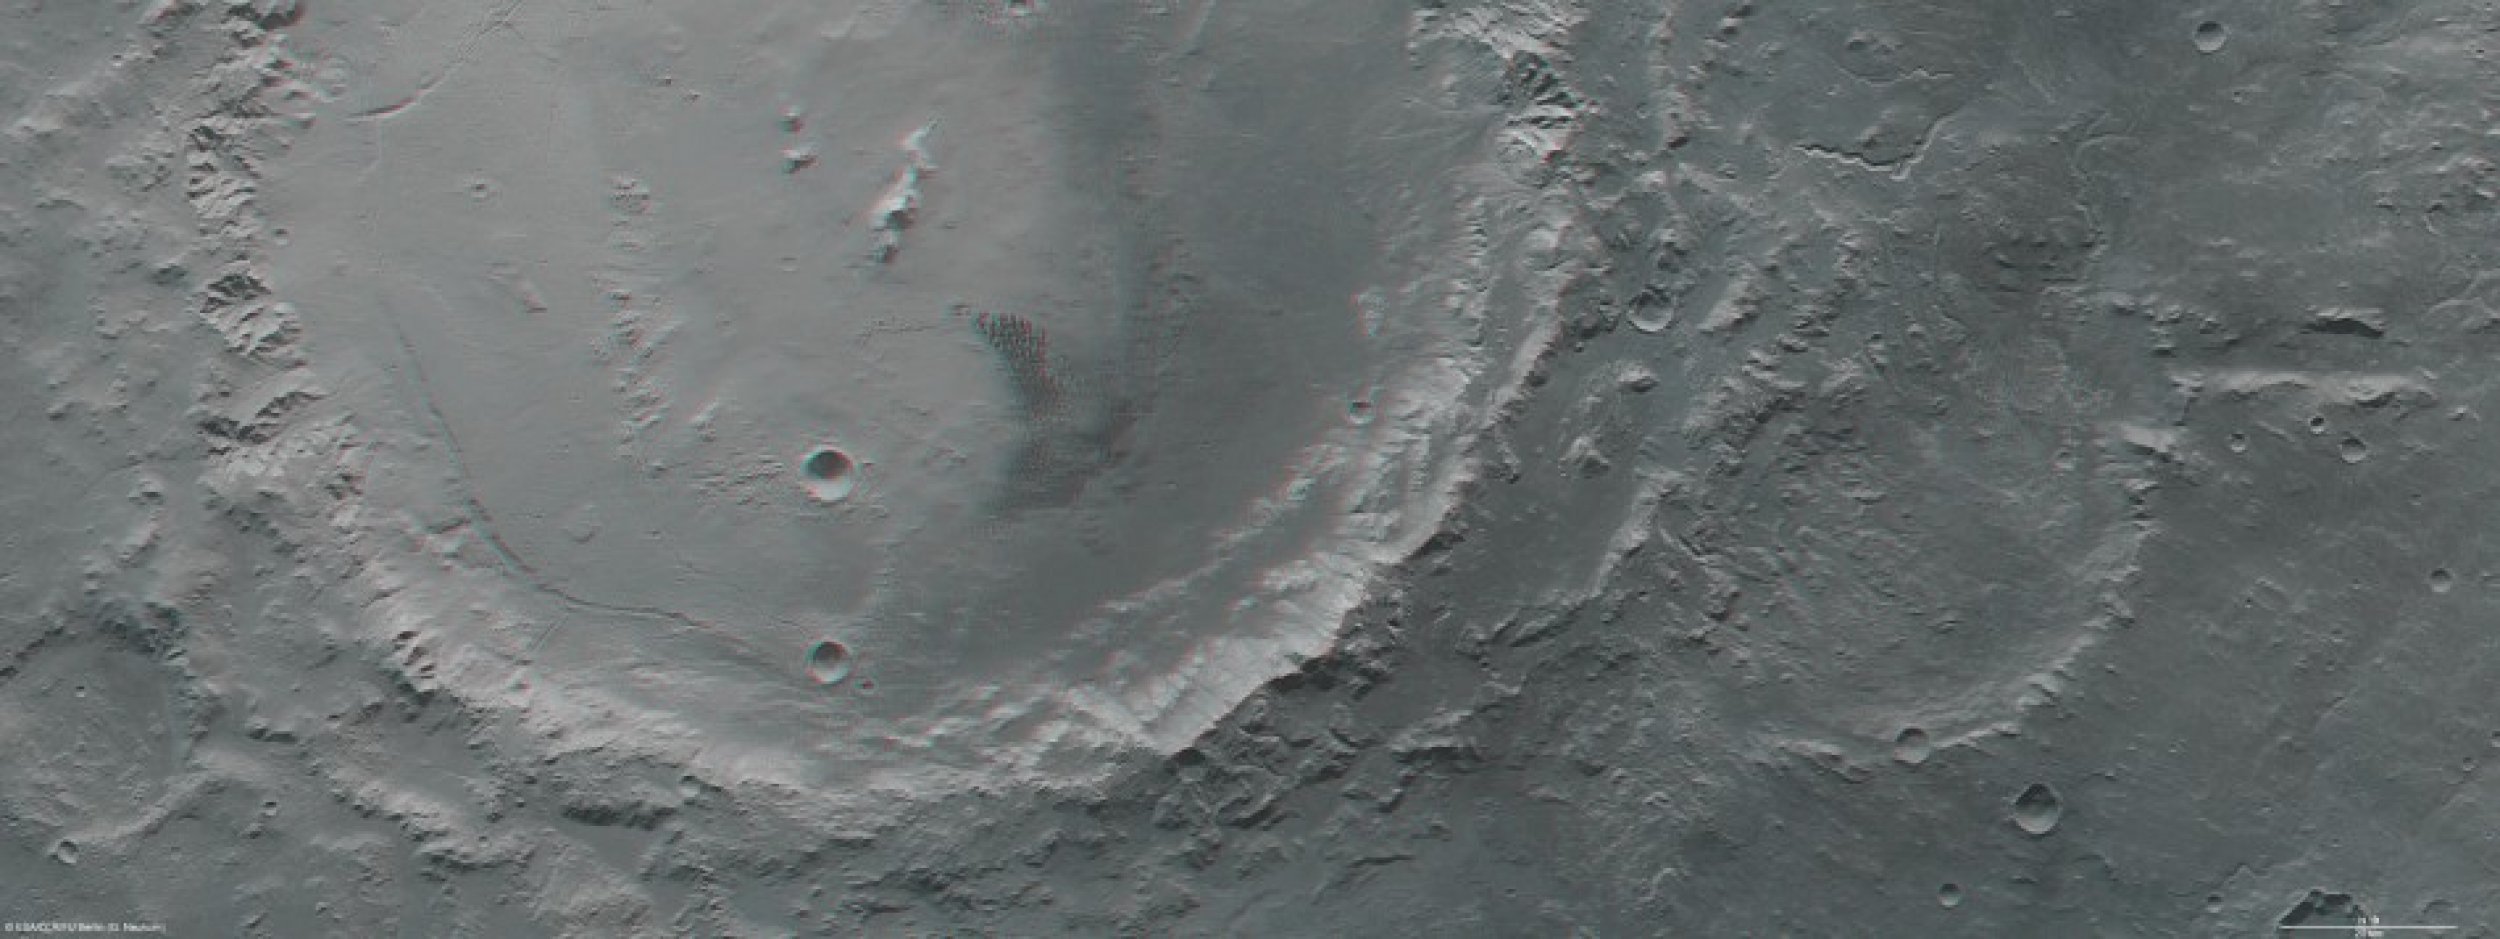 Holden and Eberswalde crater in 3D